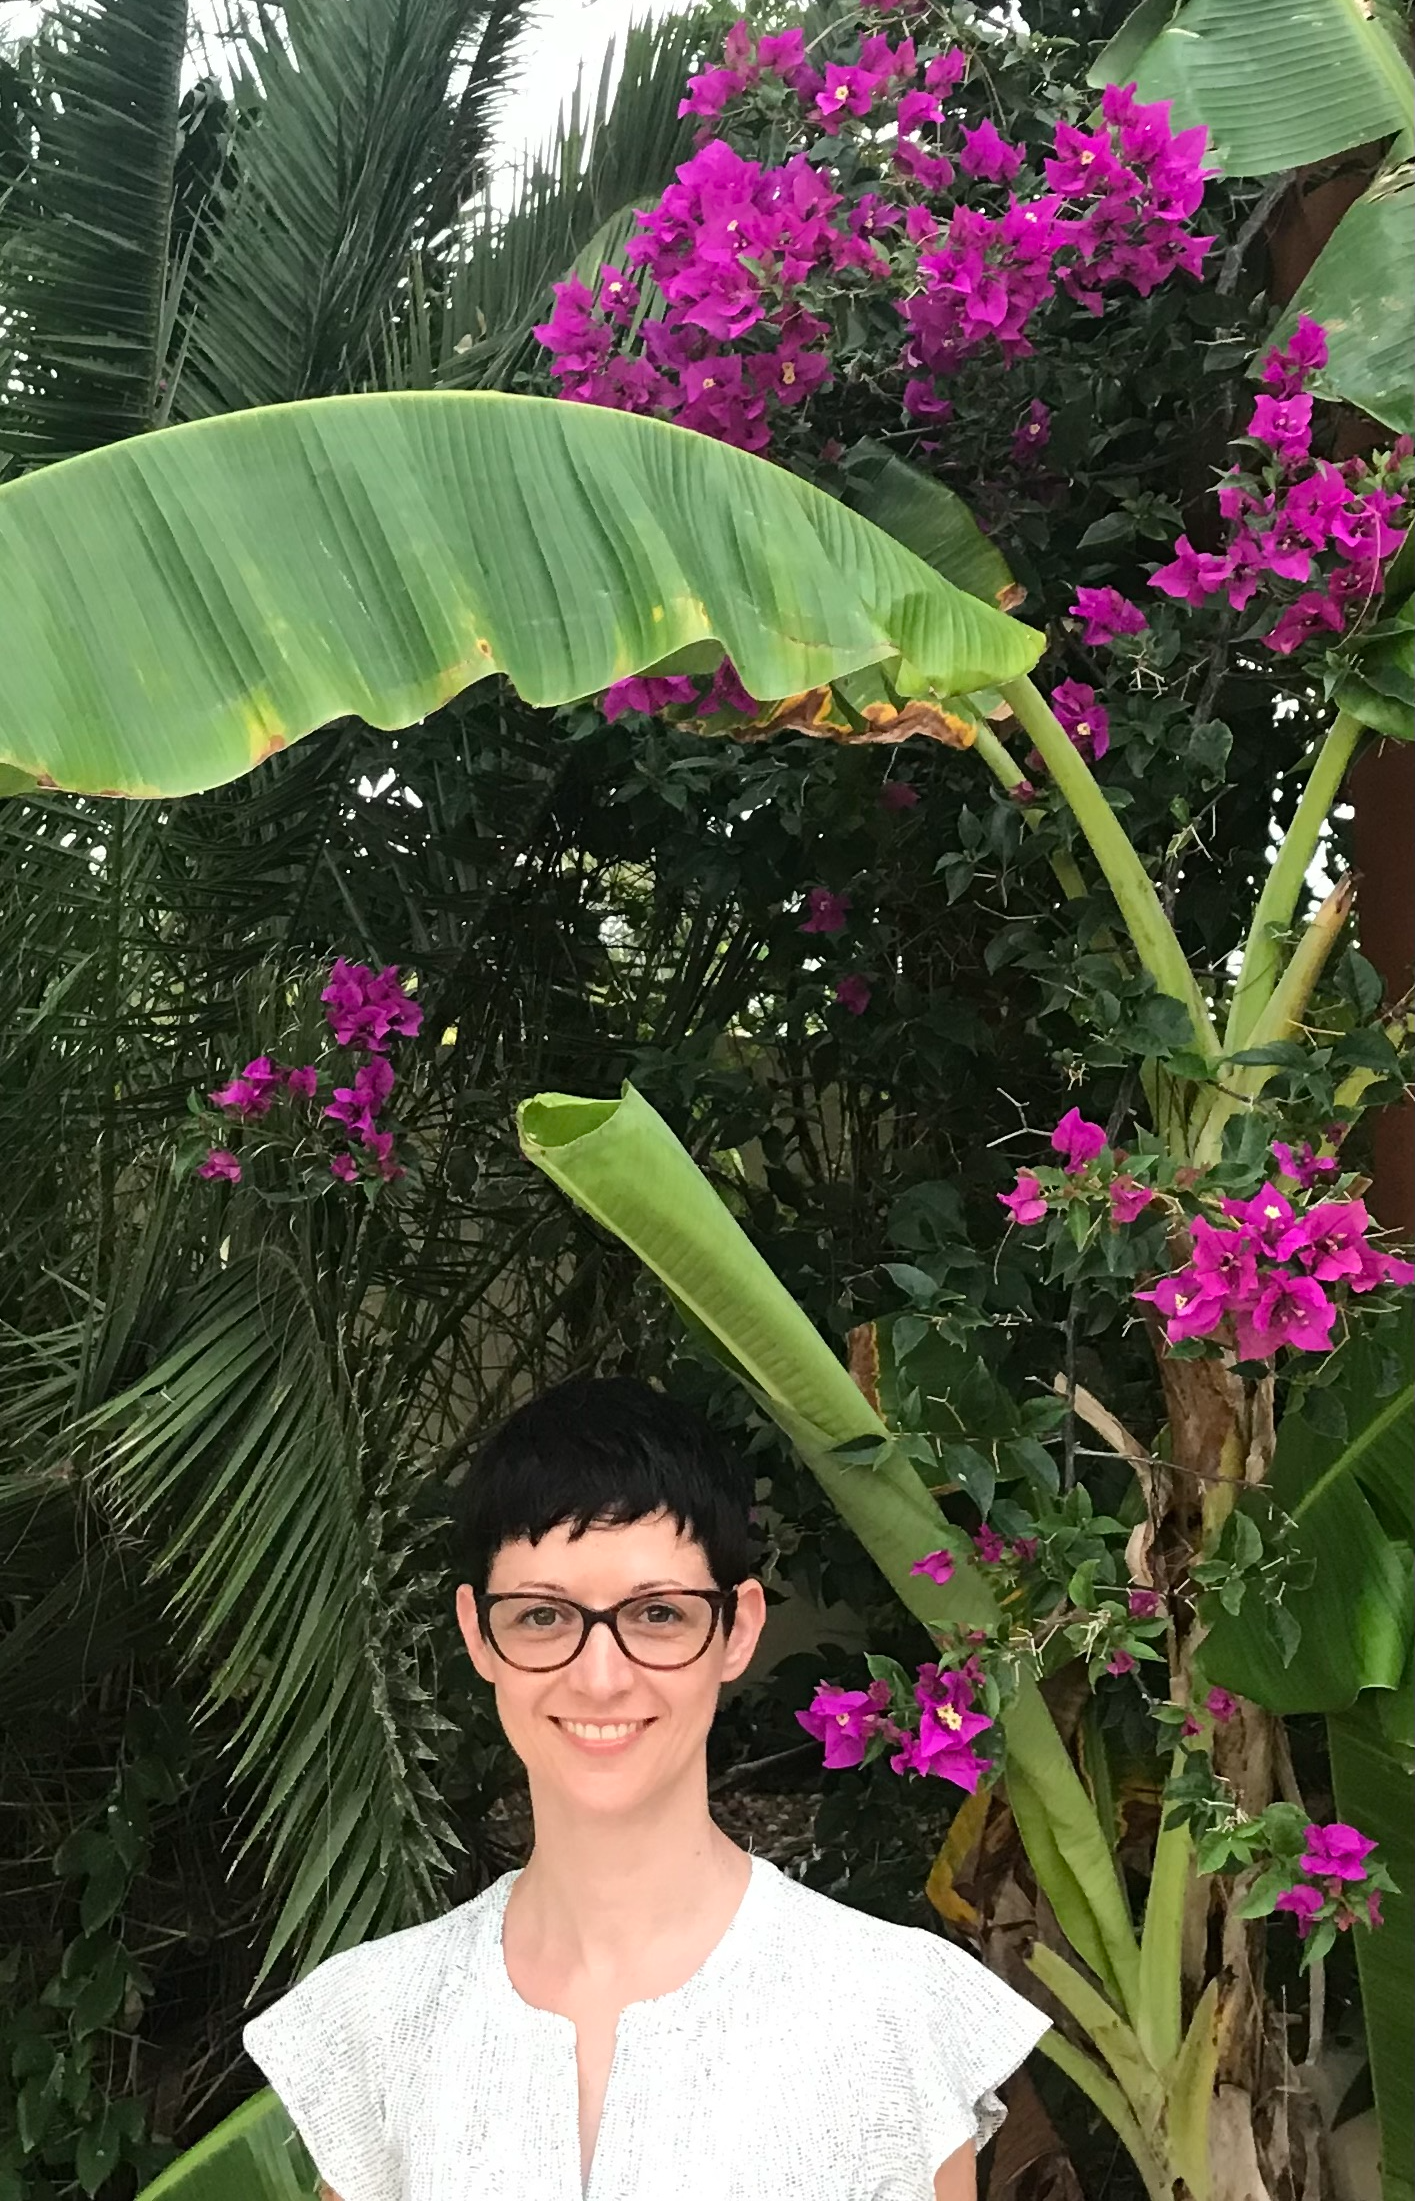 another picture of Francesca smiling, while surrounded by lush vegetation and bright purple flowers